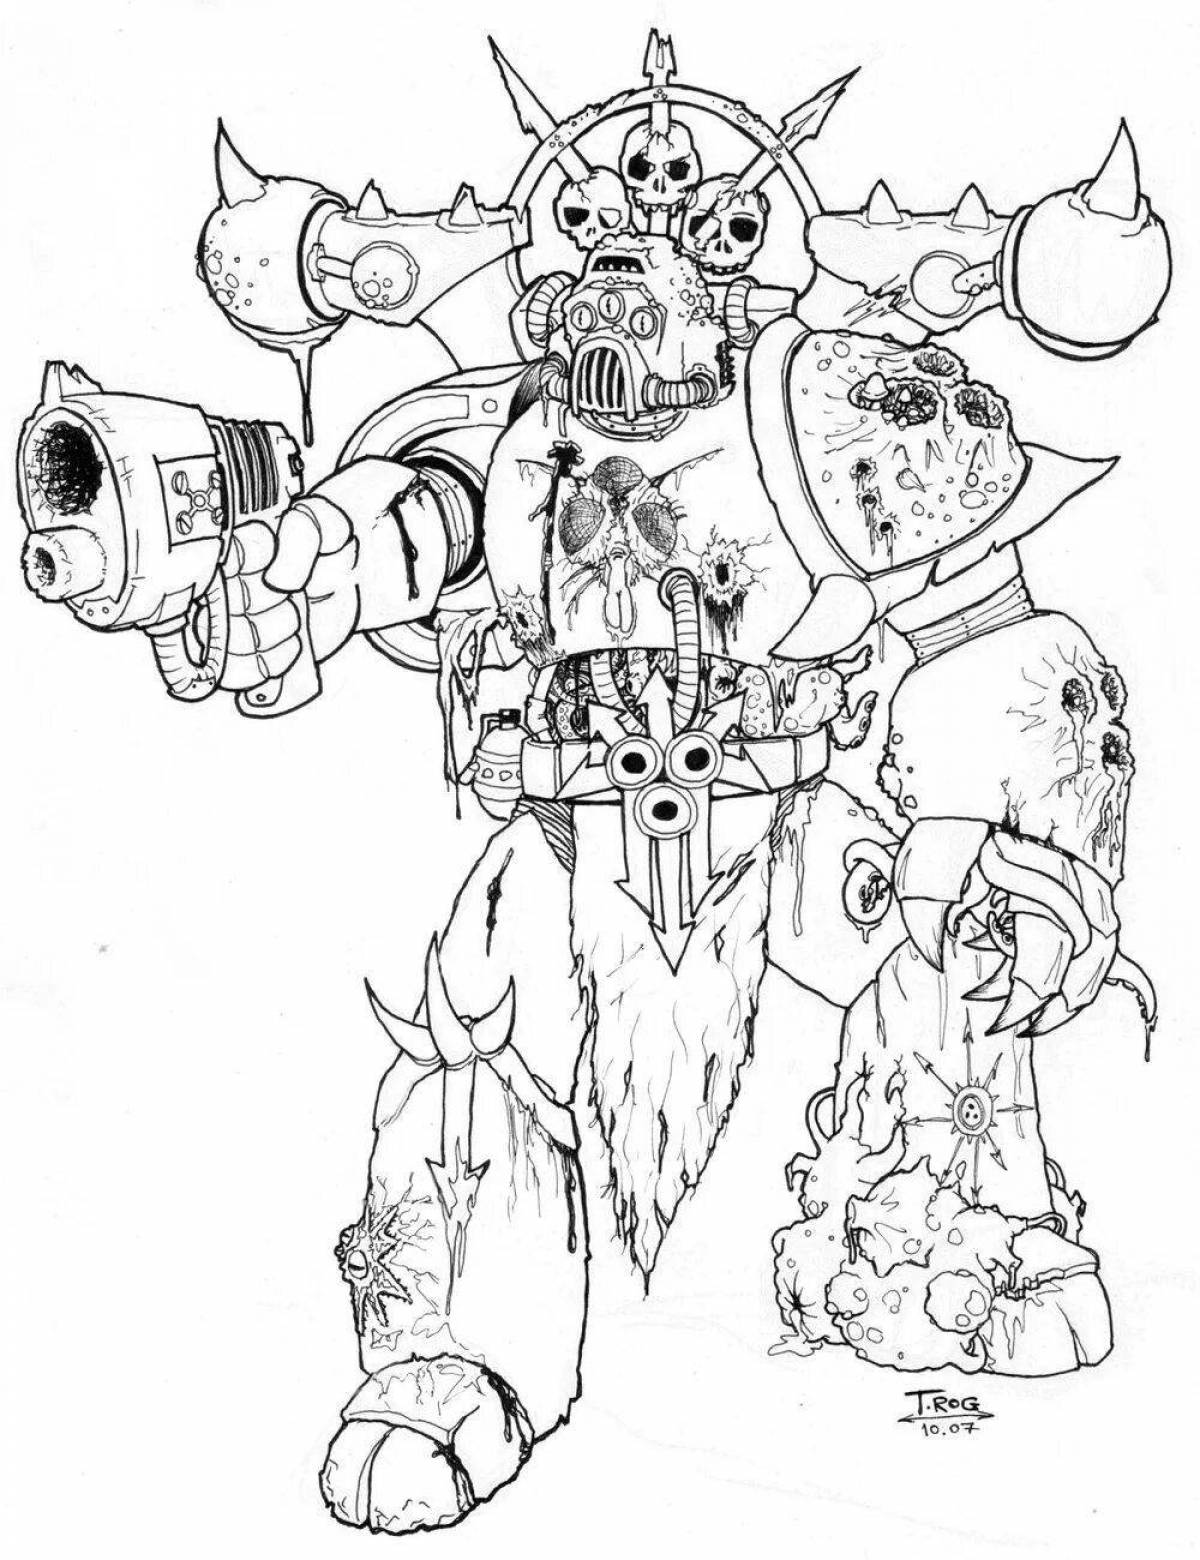 Amazing Space Marine coloring page